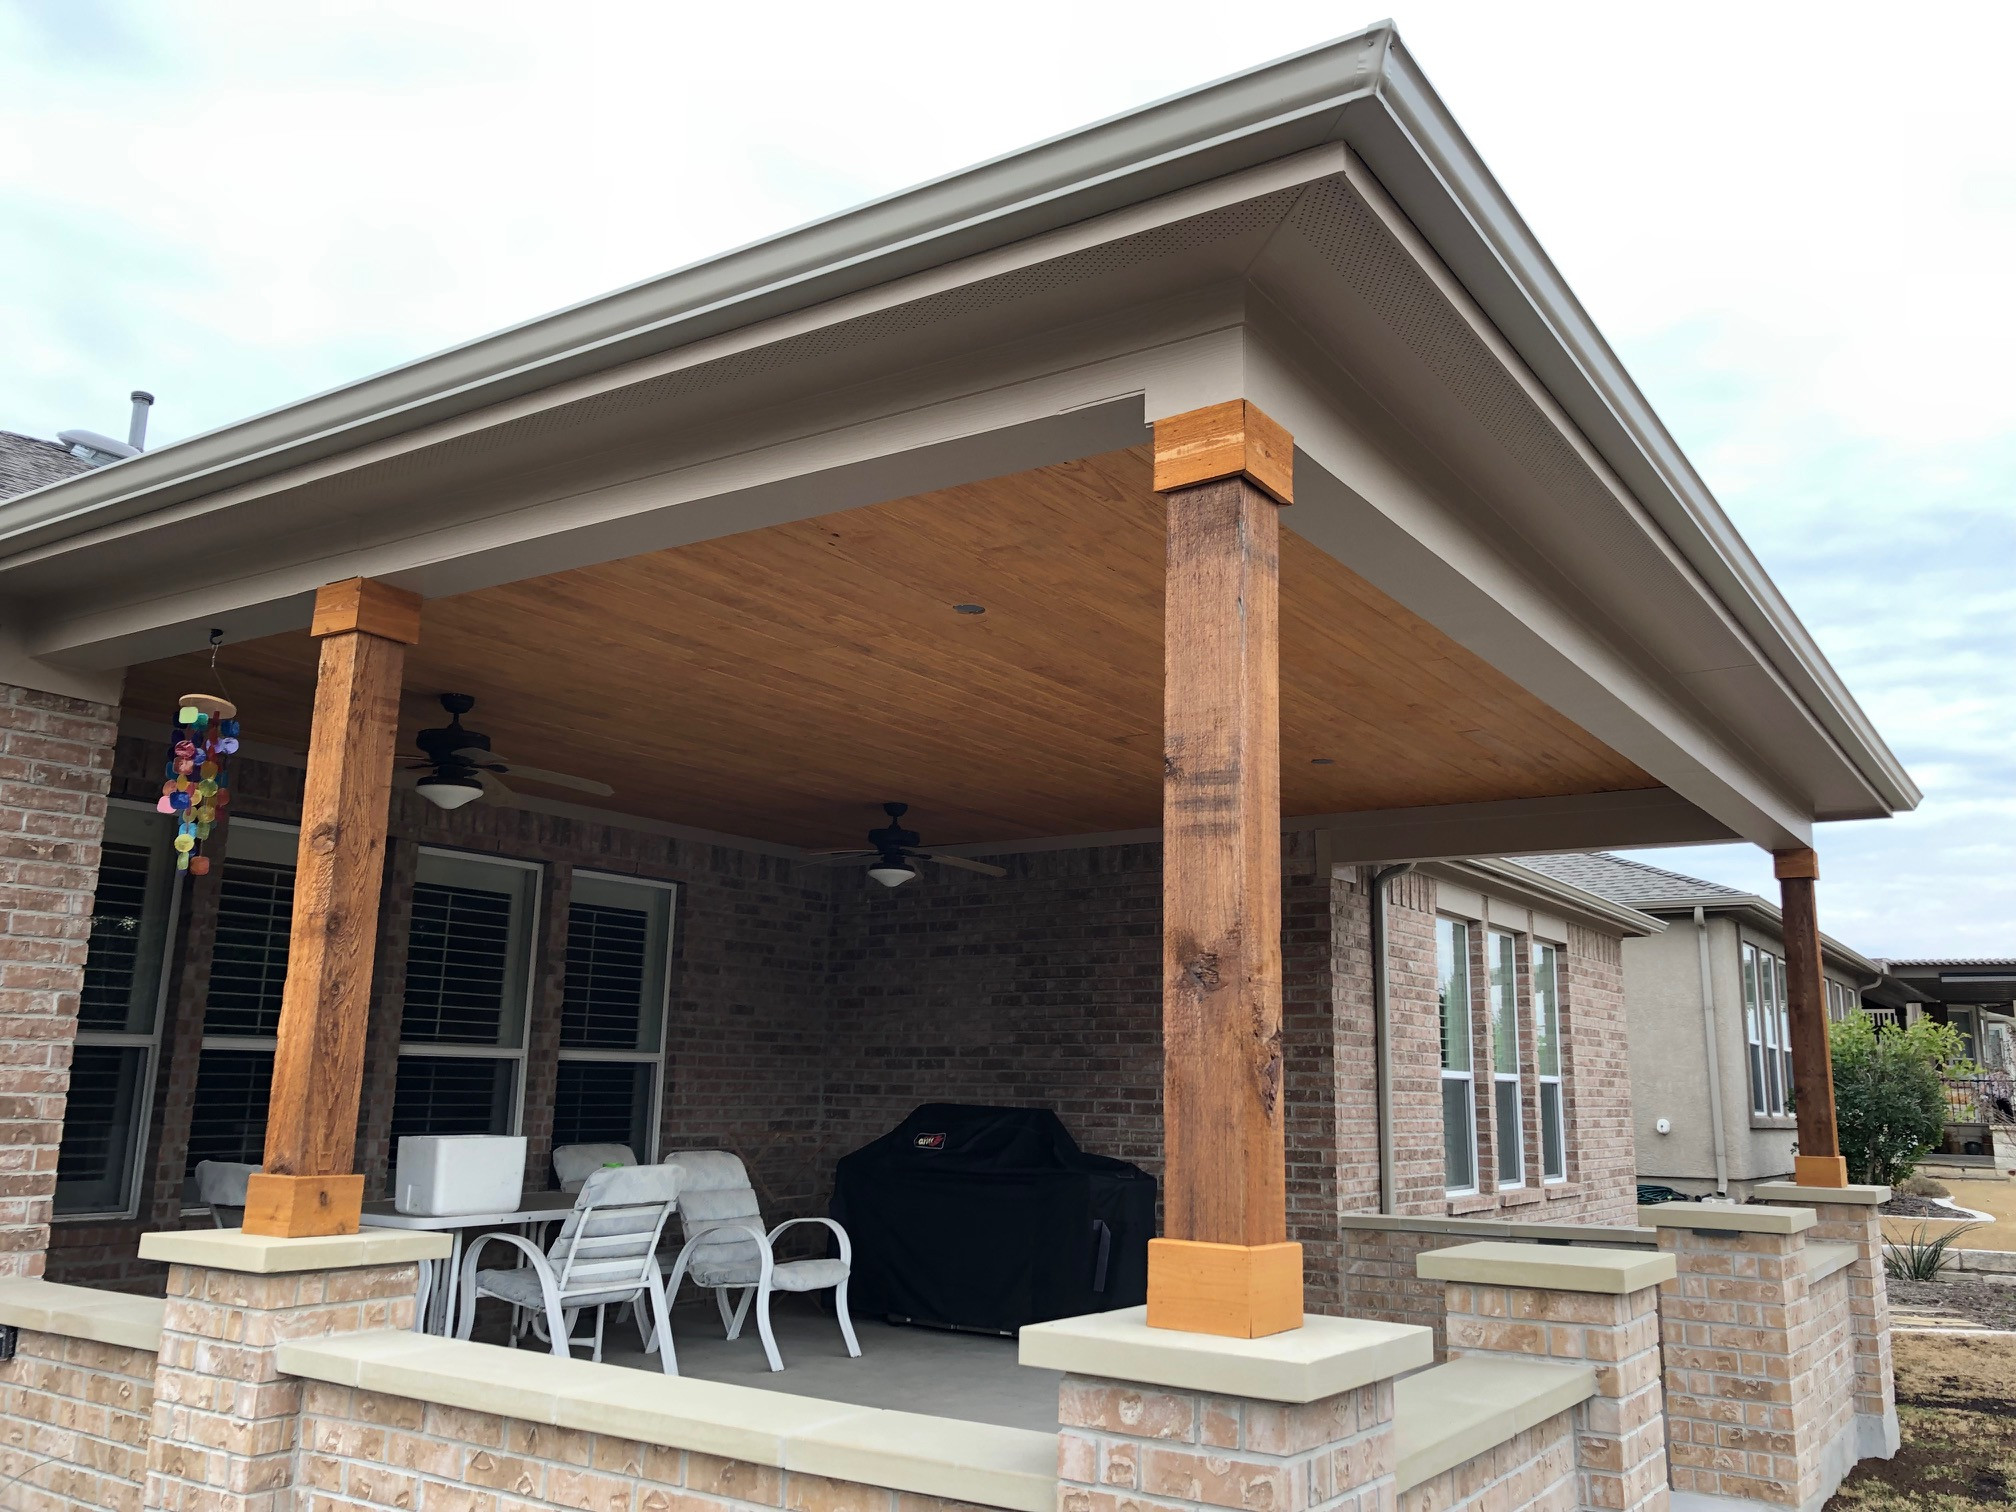 Shingled roof extension with stained cedar tongue & groove ceiling, concrete pat